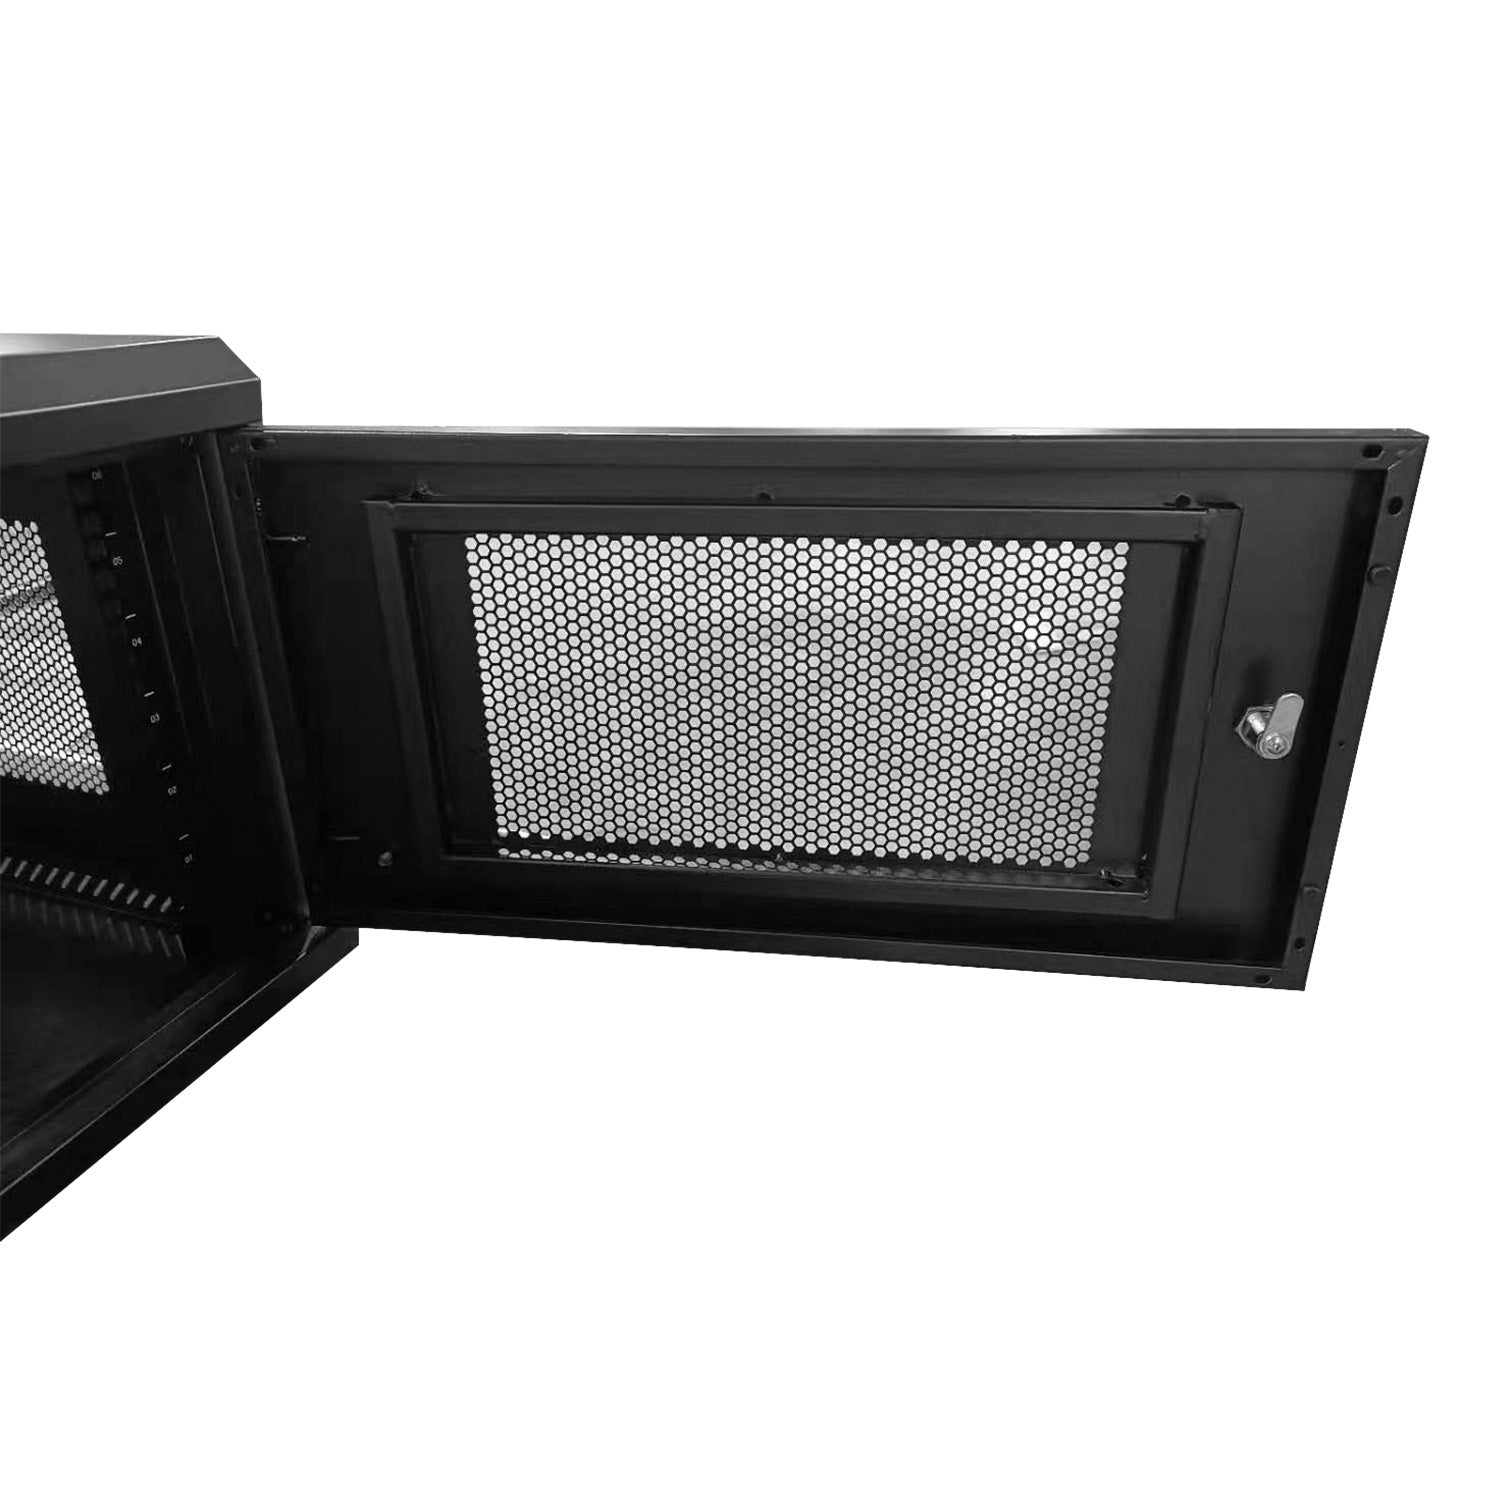 9U 500mm Deep 19" LMS Data Wall Mount Comms/Data Cabinet Rack Pre Built w/ Perforated Front Door & Sides Panels - Black